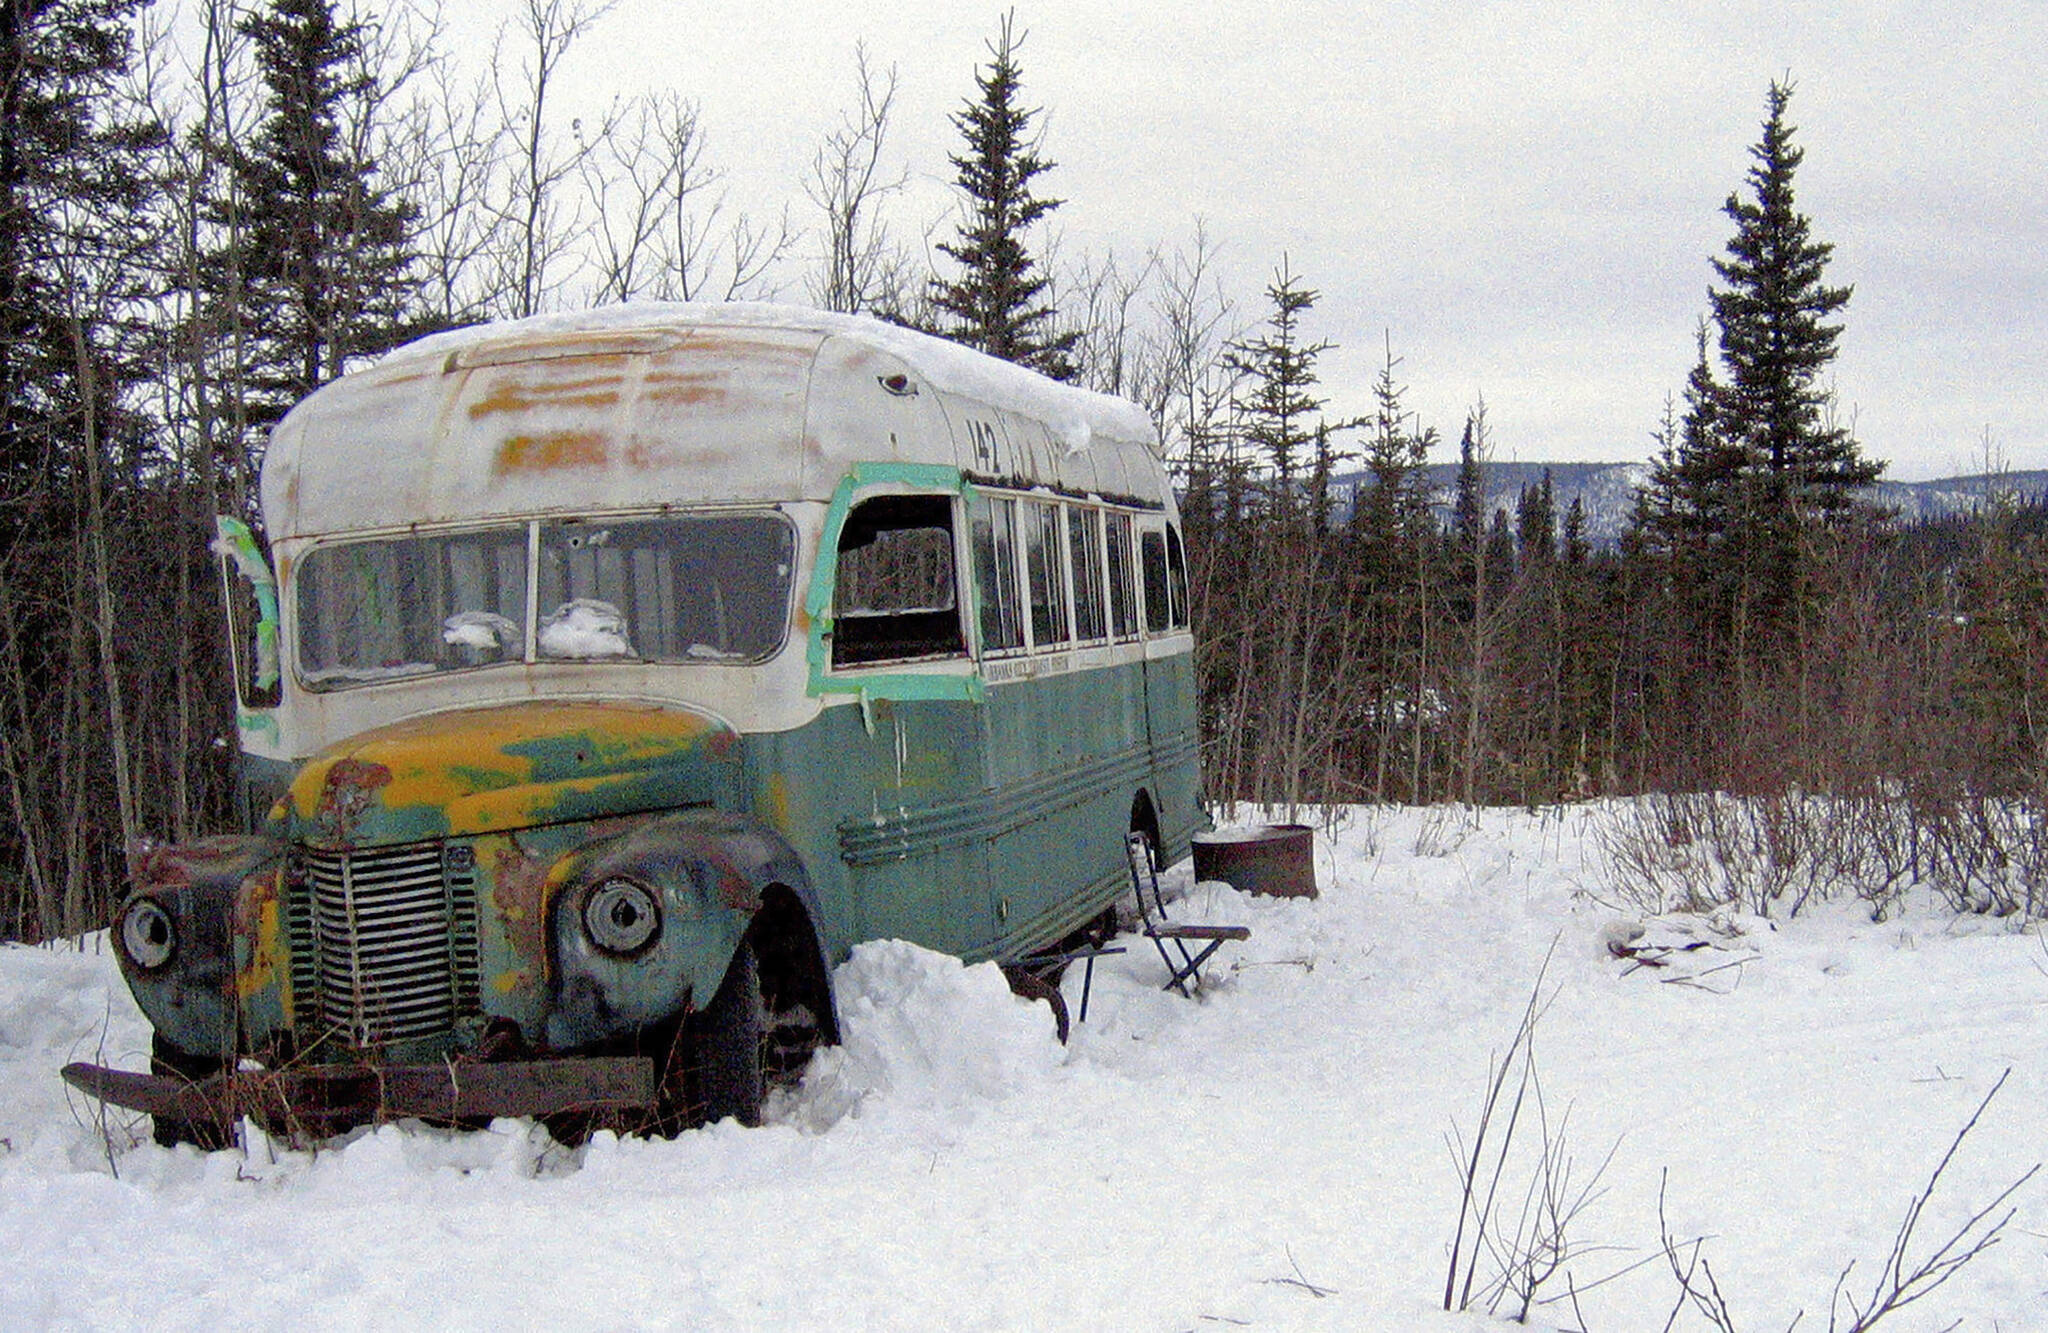 In this March 21, 2006, file photo, is the abandoned bus where Christopher McCandless starved to death in 1992 near Healy, Alaska. The bus that people sometimes embarked on deadly pilgrimages to Alaska’s backcountry to visit can now safely be viewed at the University of Alaska Fairbanks while it undergoes preservation work. The bus was moved to the university’s engineering facility in early Oct. 2021, while it’s being prepared for outdoor display at the Museum of the North, Fairbanks television station KTVF reported. (AP Photo/Jillian Rogers, File )